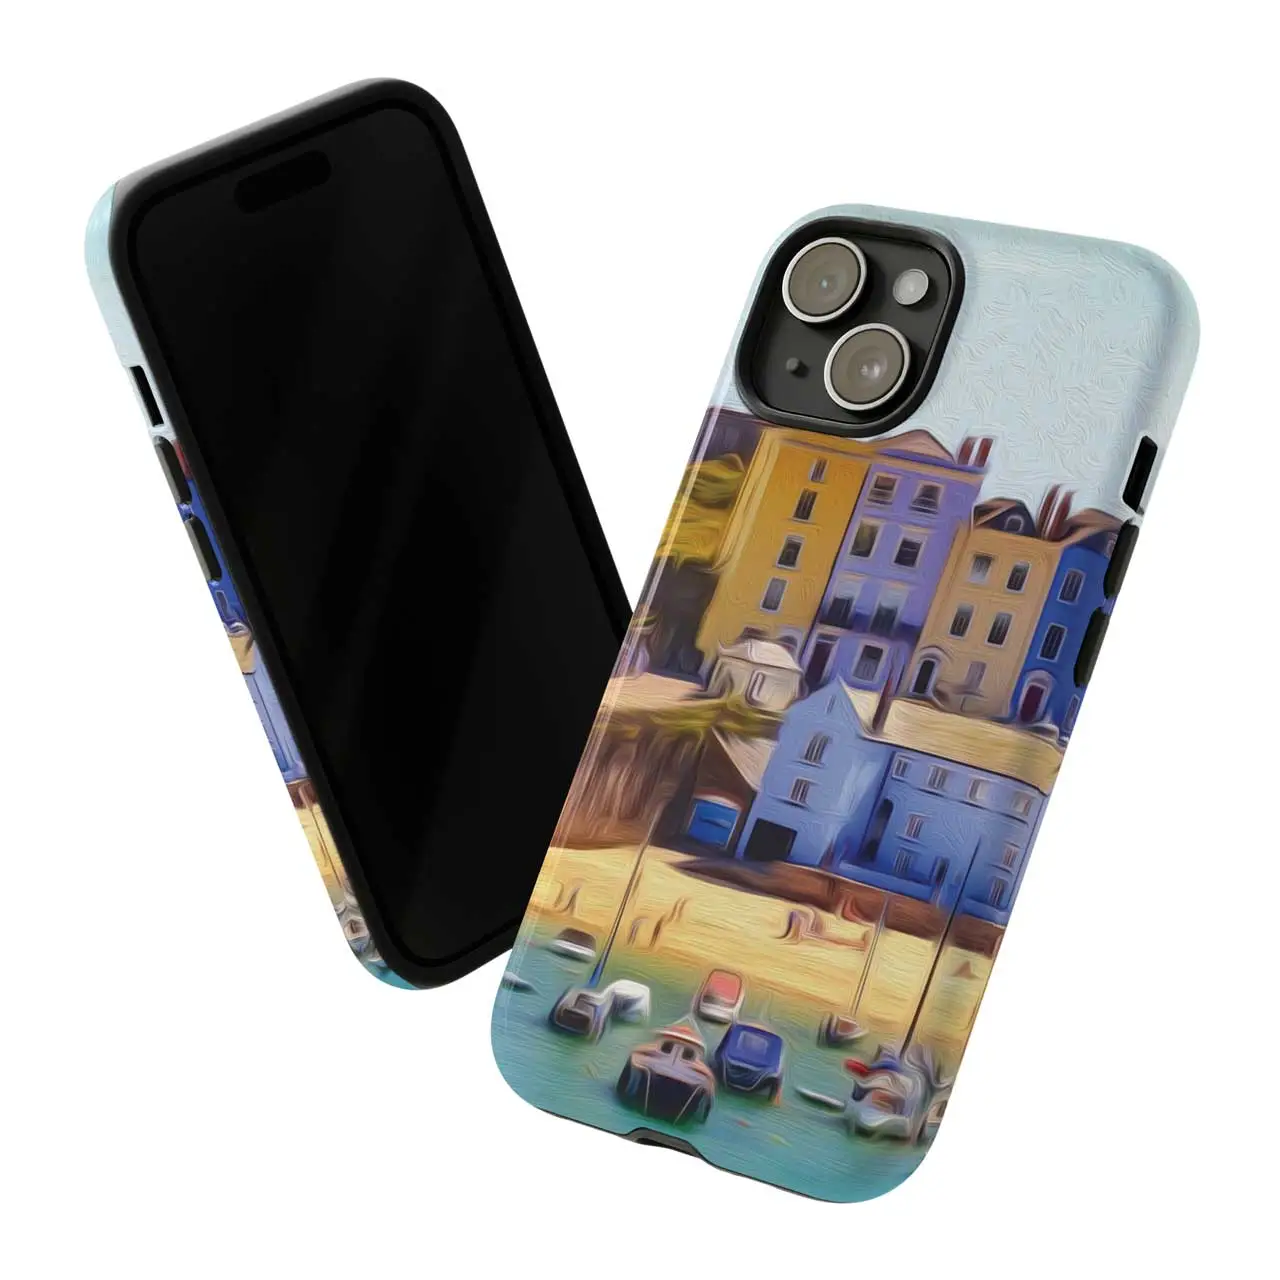 Around Tenby Tough Smartphone Case Small Tenby Harbour Beach